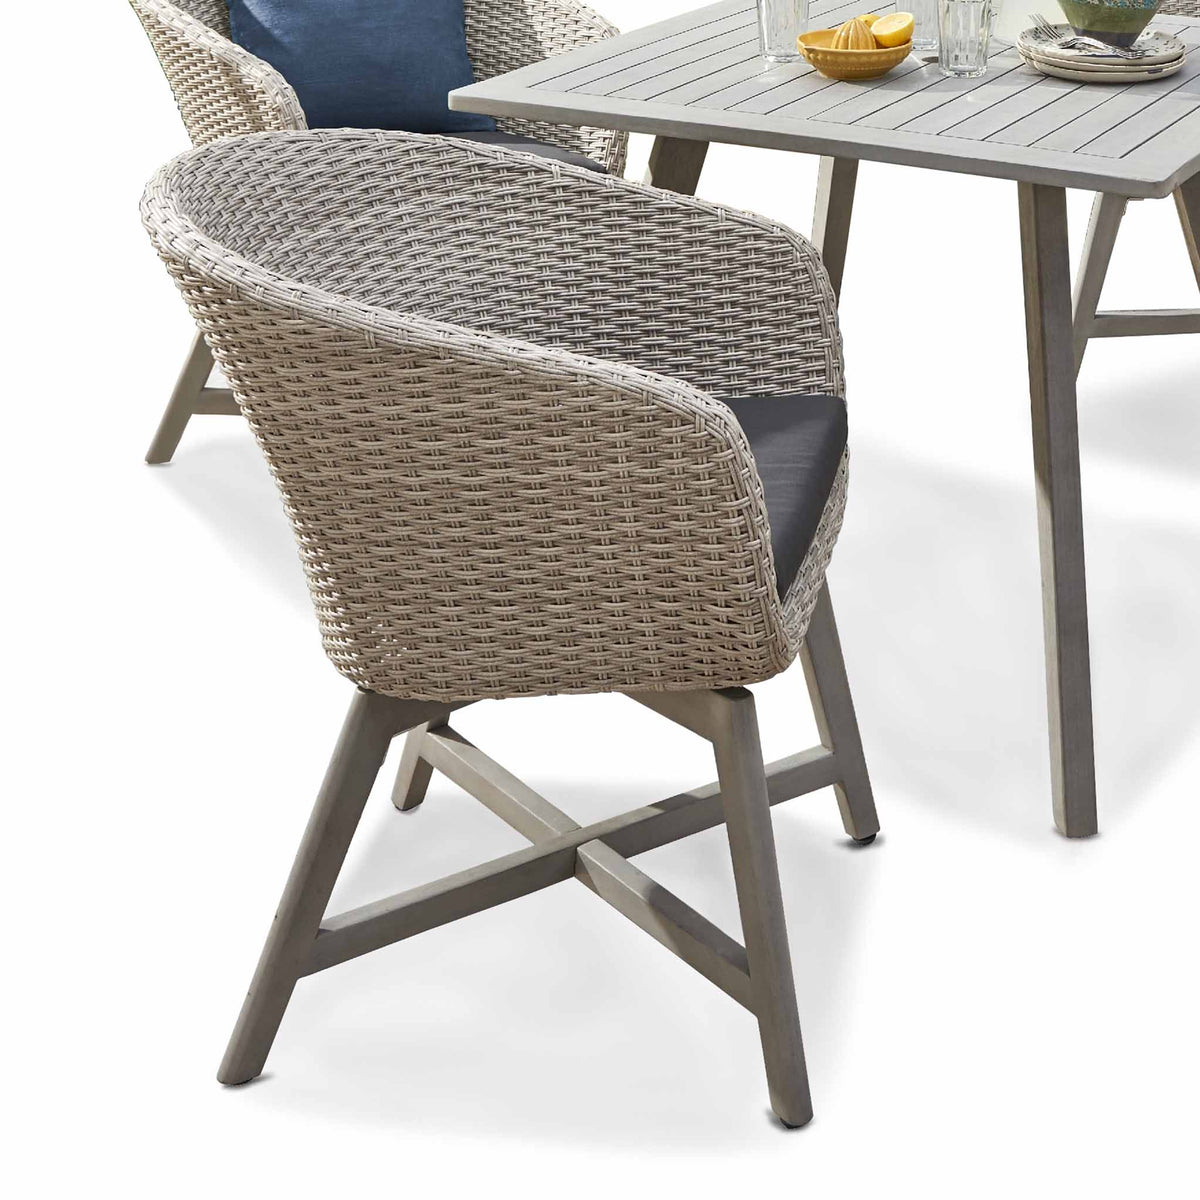 Chatsworth Rattan 4 Seat Dining Set - Close up of side of chair